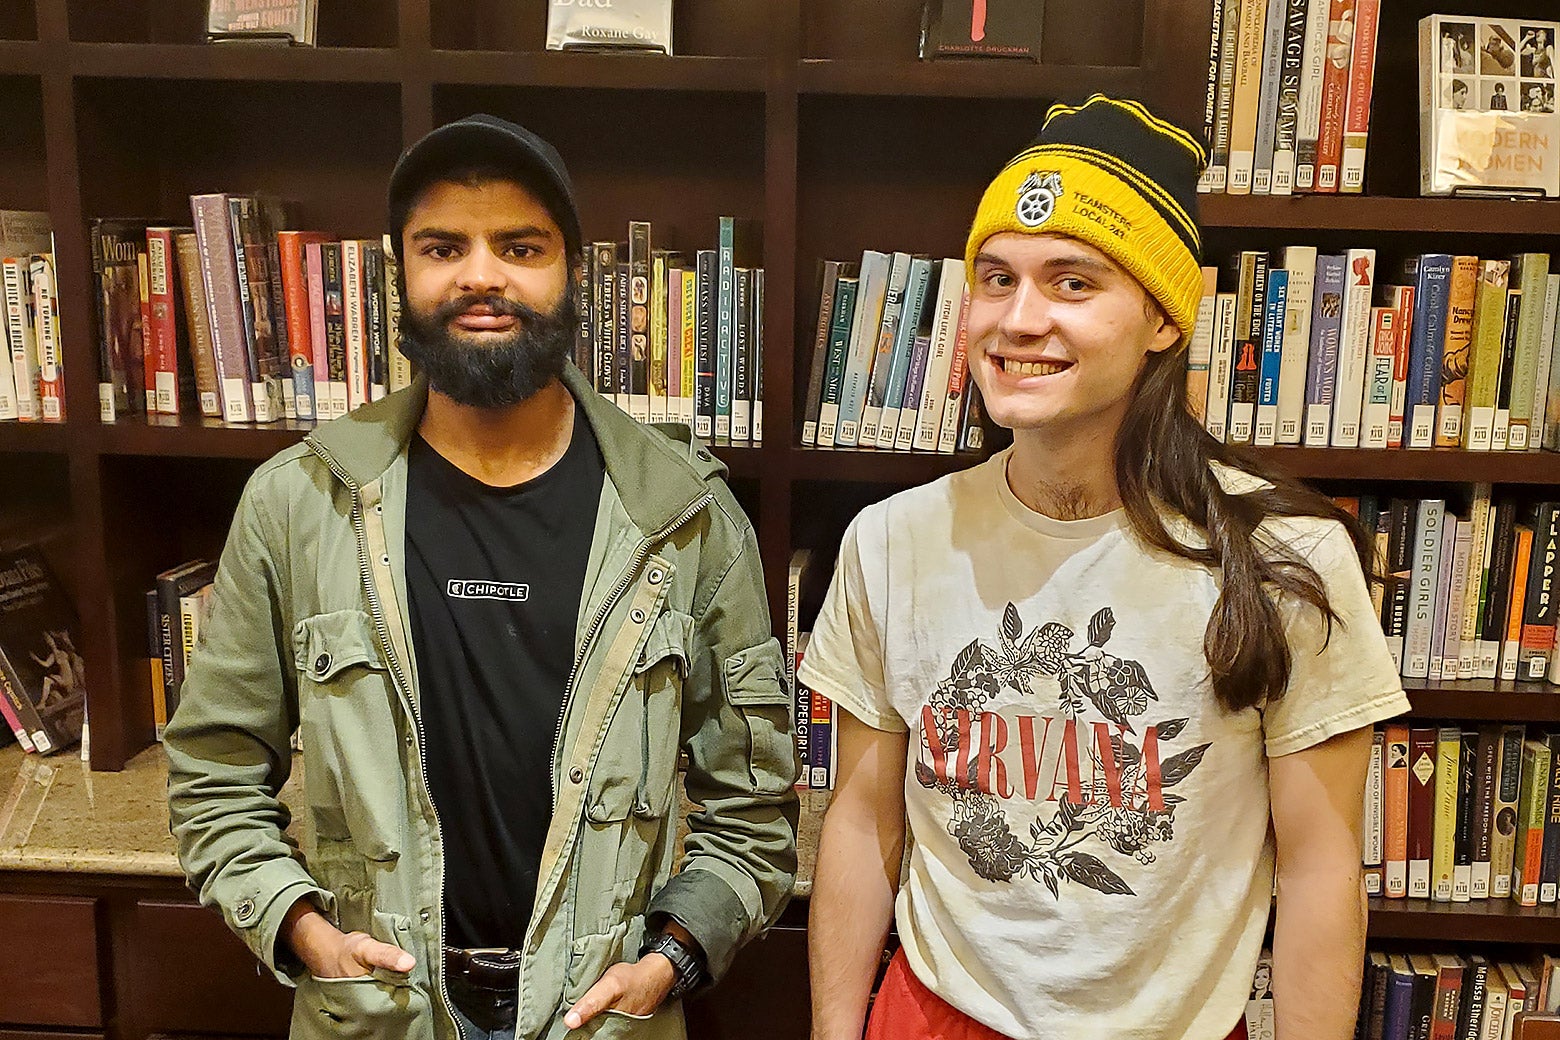 The two organizers stand in front of shelves full of books at the library.